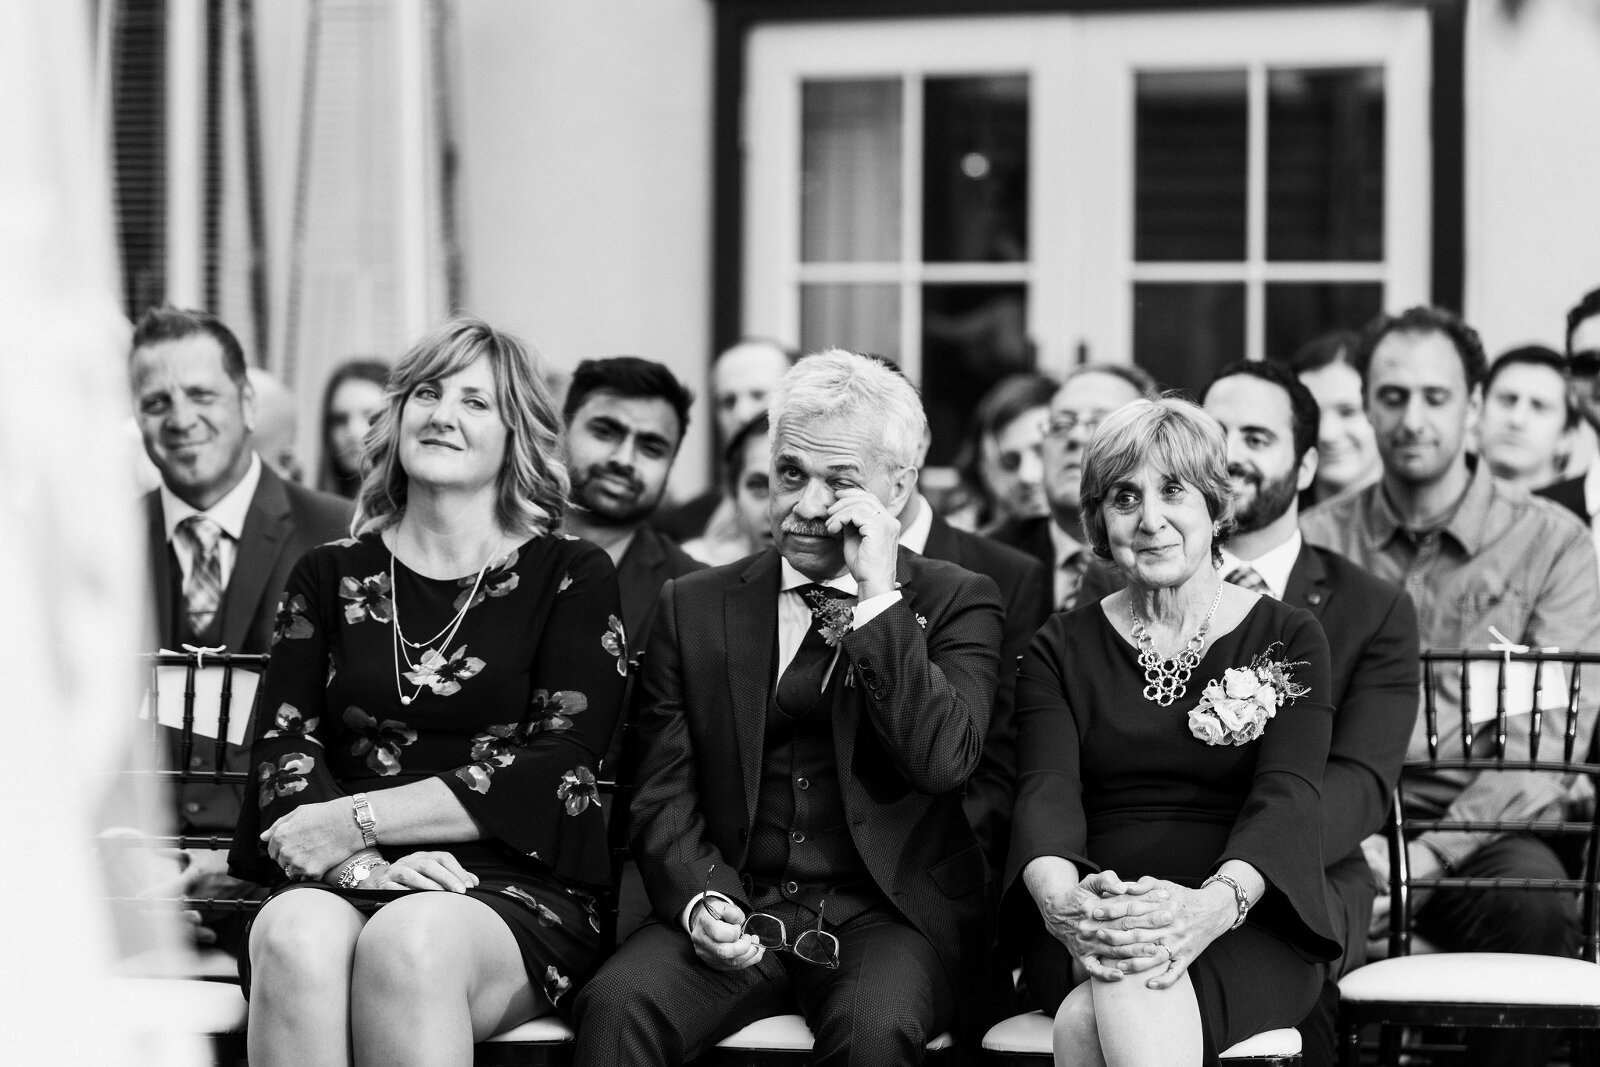 Groom's dad wiping a tear away as he watches his son get married